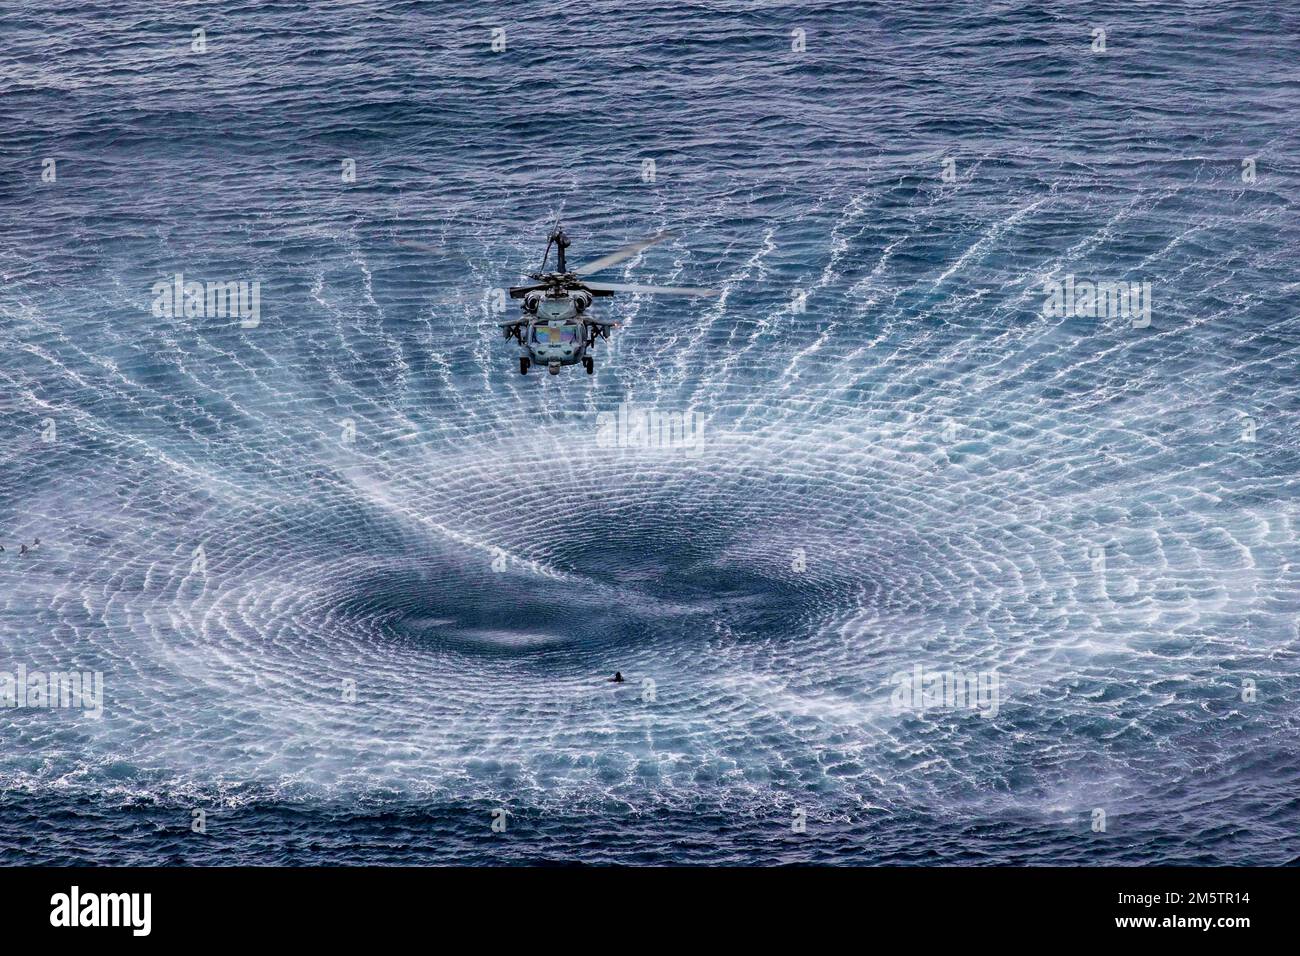 At Sea. 13th Dec, 2022. Sailors assigned to Explosive Ordnance Disposal Mobile Unit 12, jump from an MH-60S Nighthawk helicopter, attached to Helicopter Sea Combat Squadron (HSC) 5, December. 13, 2022. Navy EOD operate as part of Navy Expeditionary Combat Command and are experts in countering explosive hazards in all environments by being able to locate, identify, render safe, recover, conduct field evaluation, and dispose of all explosive ordnance. The George H.W. Bush Carrier Strike Group (CSG) is comprised of George H.W. Bush, Carrier Air Wing (CVW) 7, Destroyer Squadron 26, the Inform Stock Photo